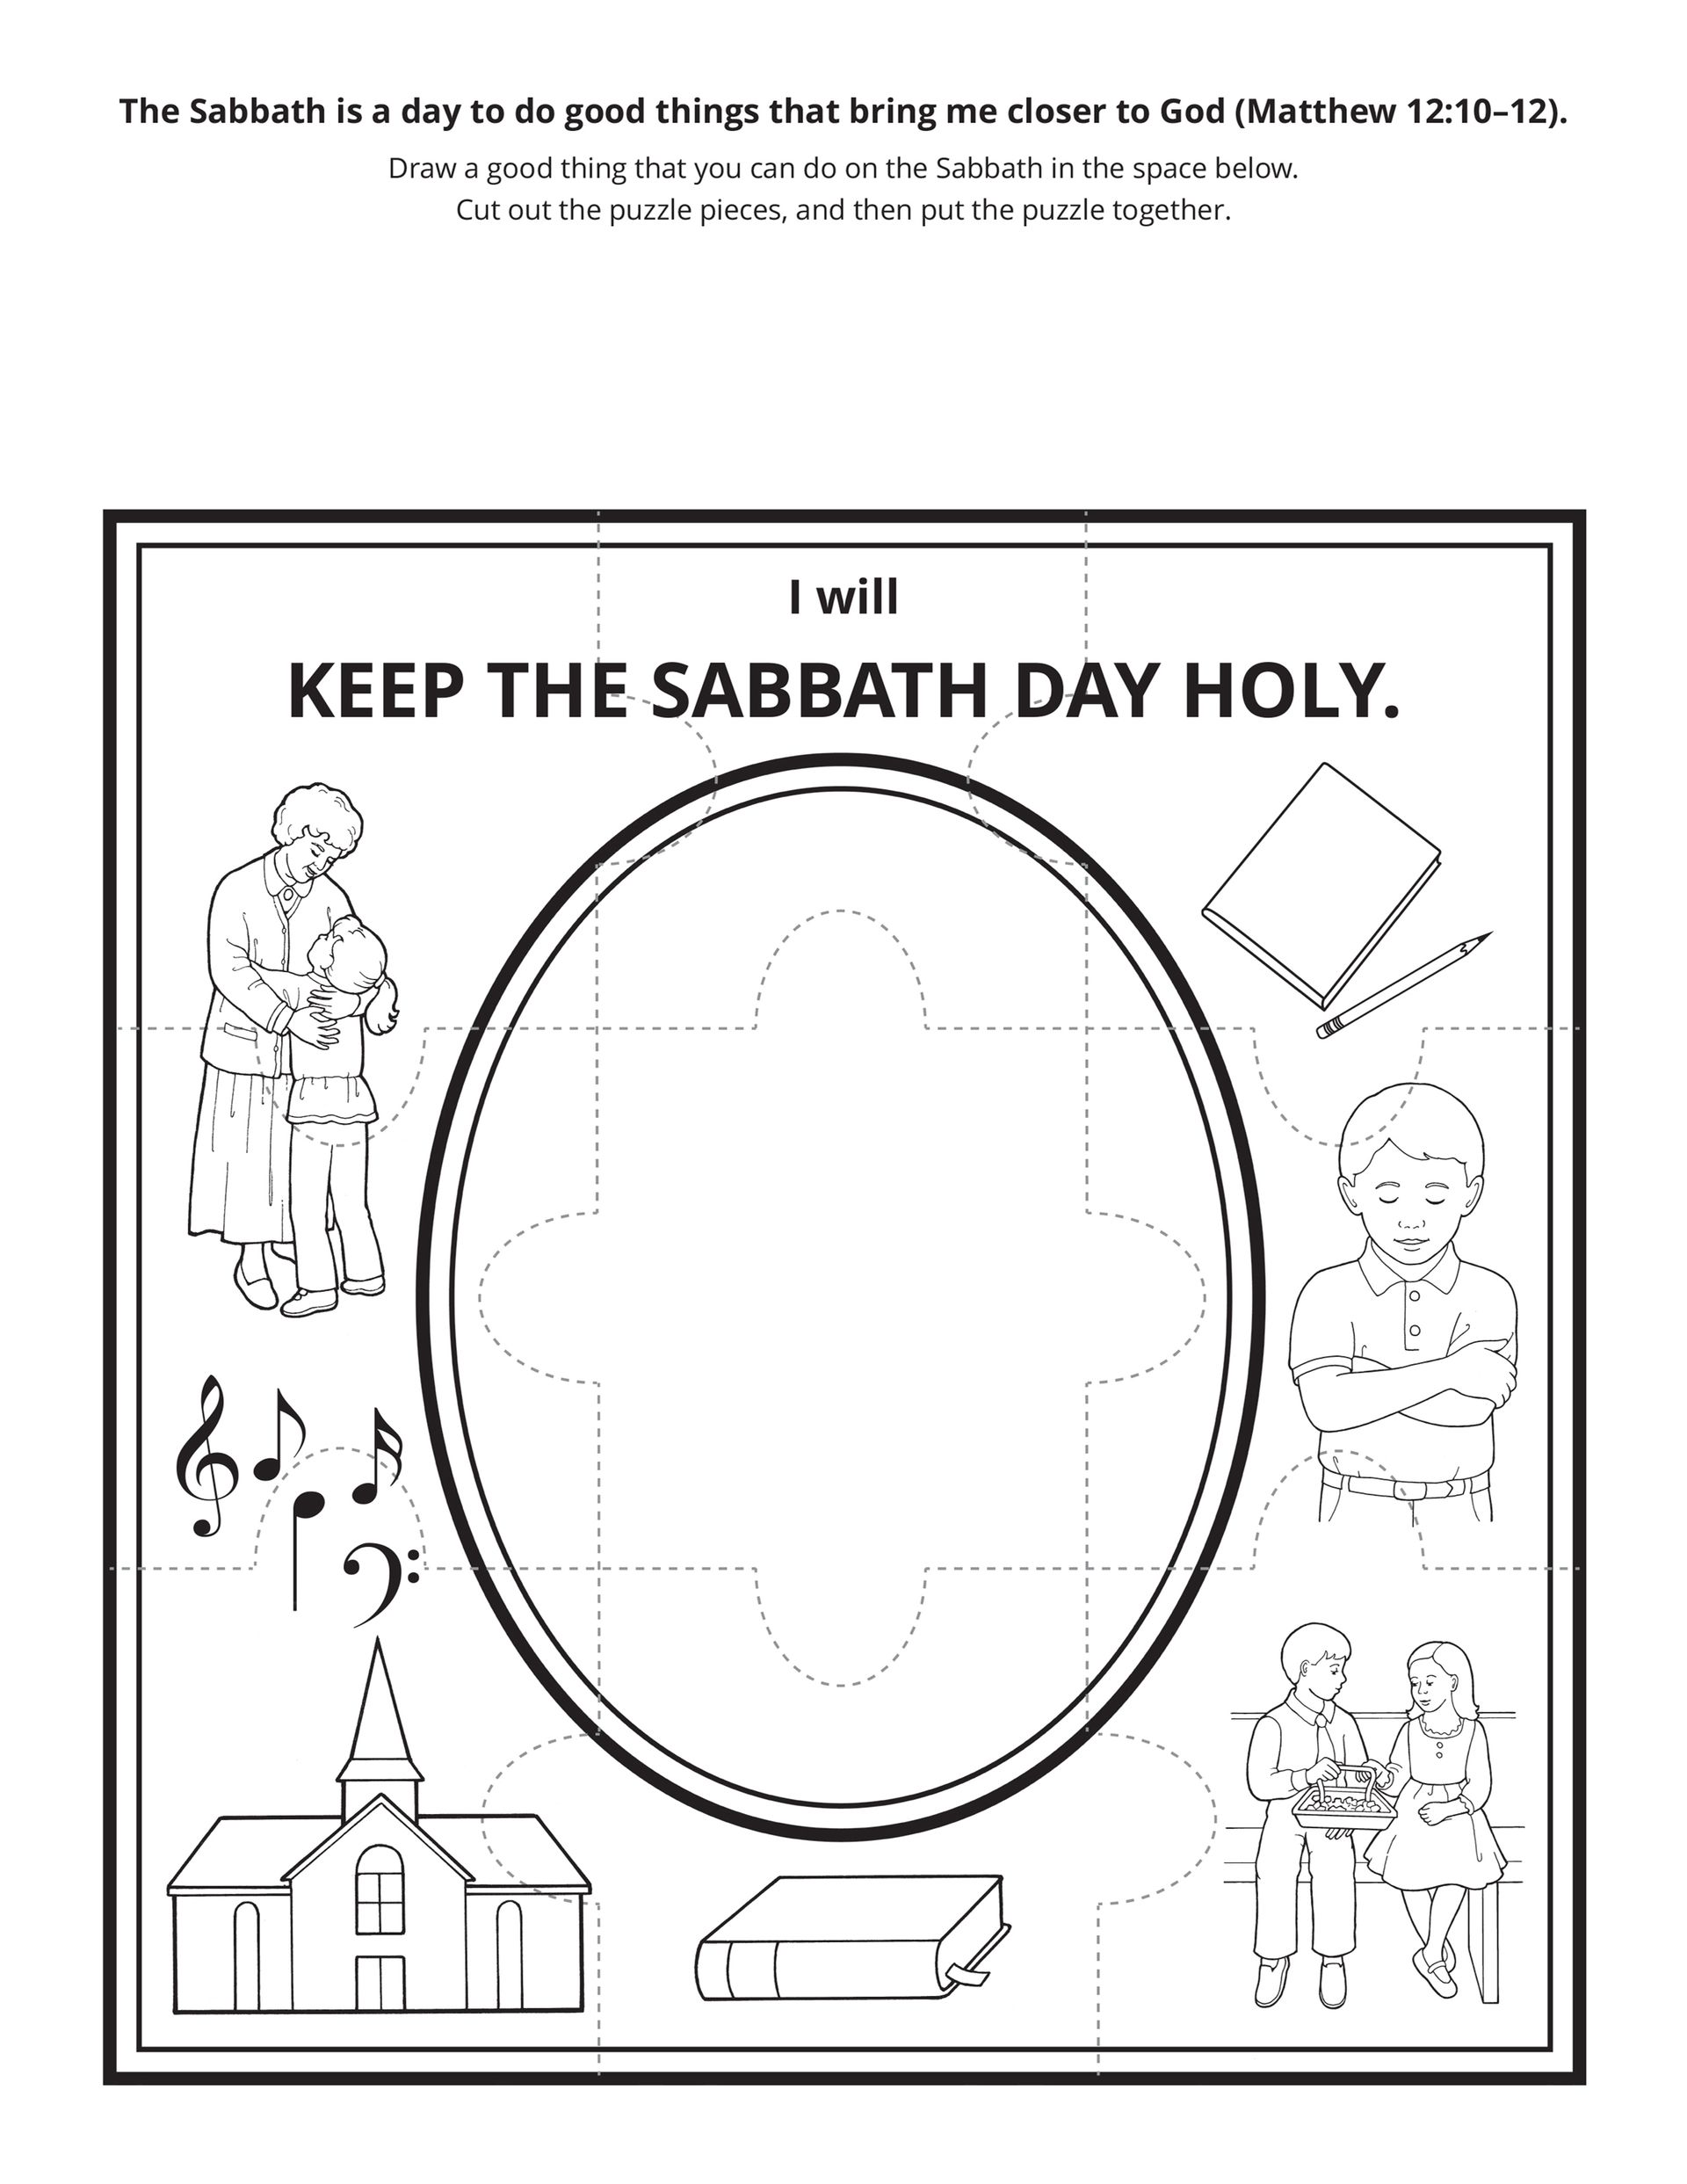 An illustration of ways to keep the Sabbath day holy.